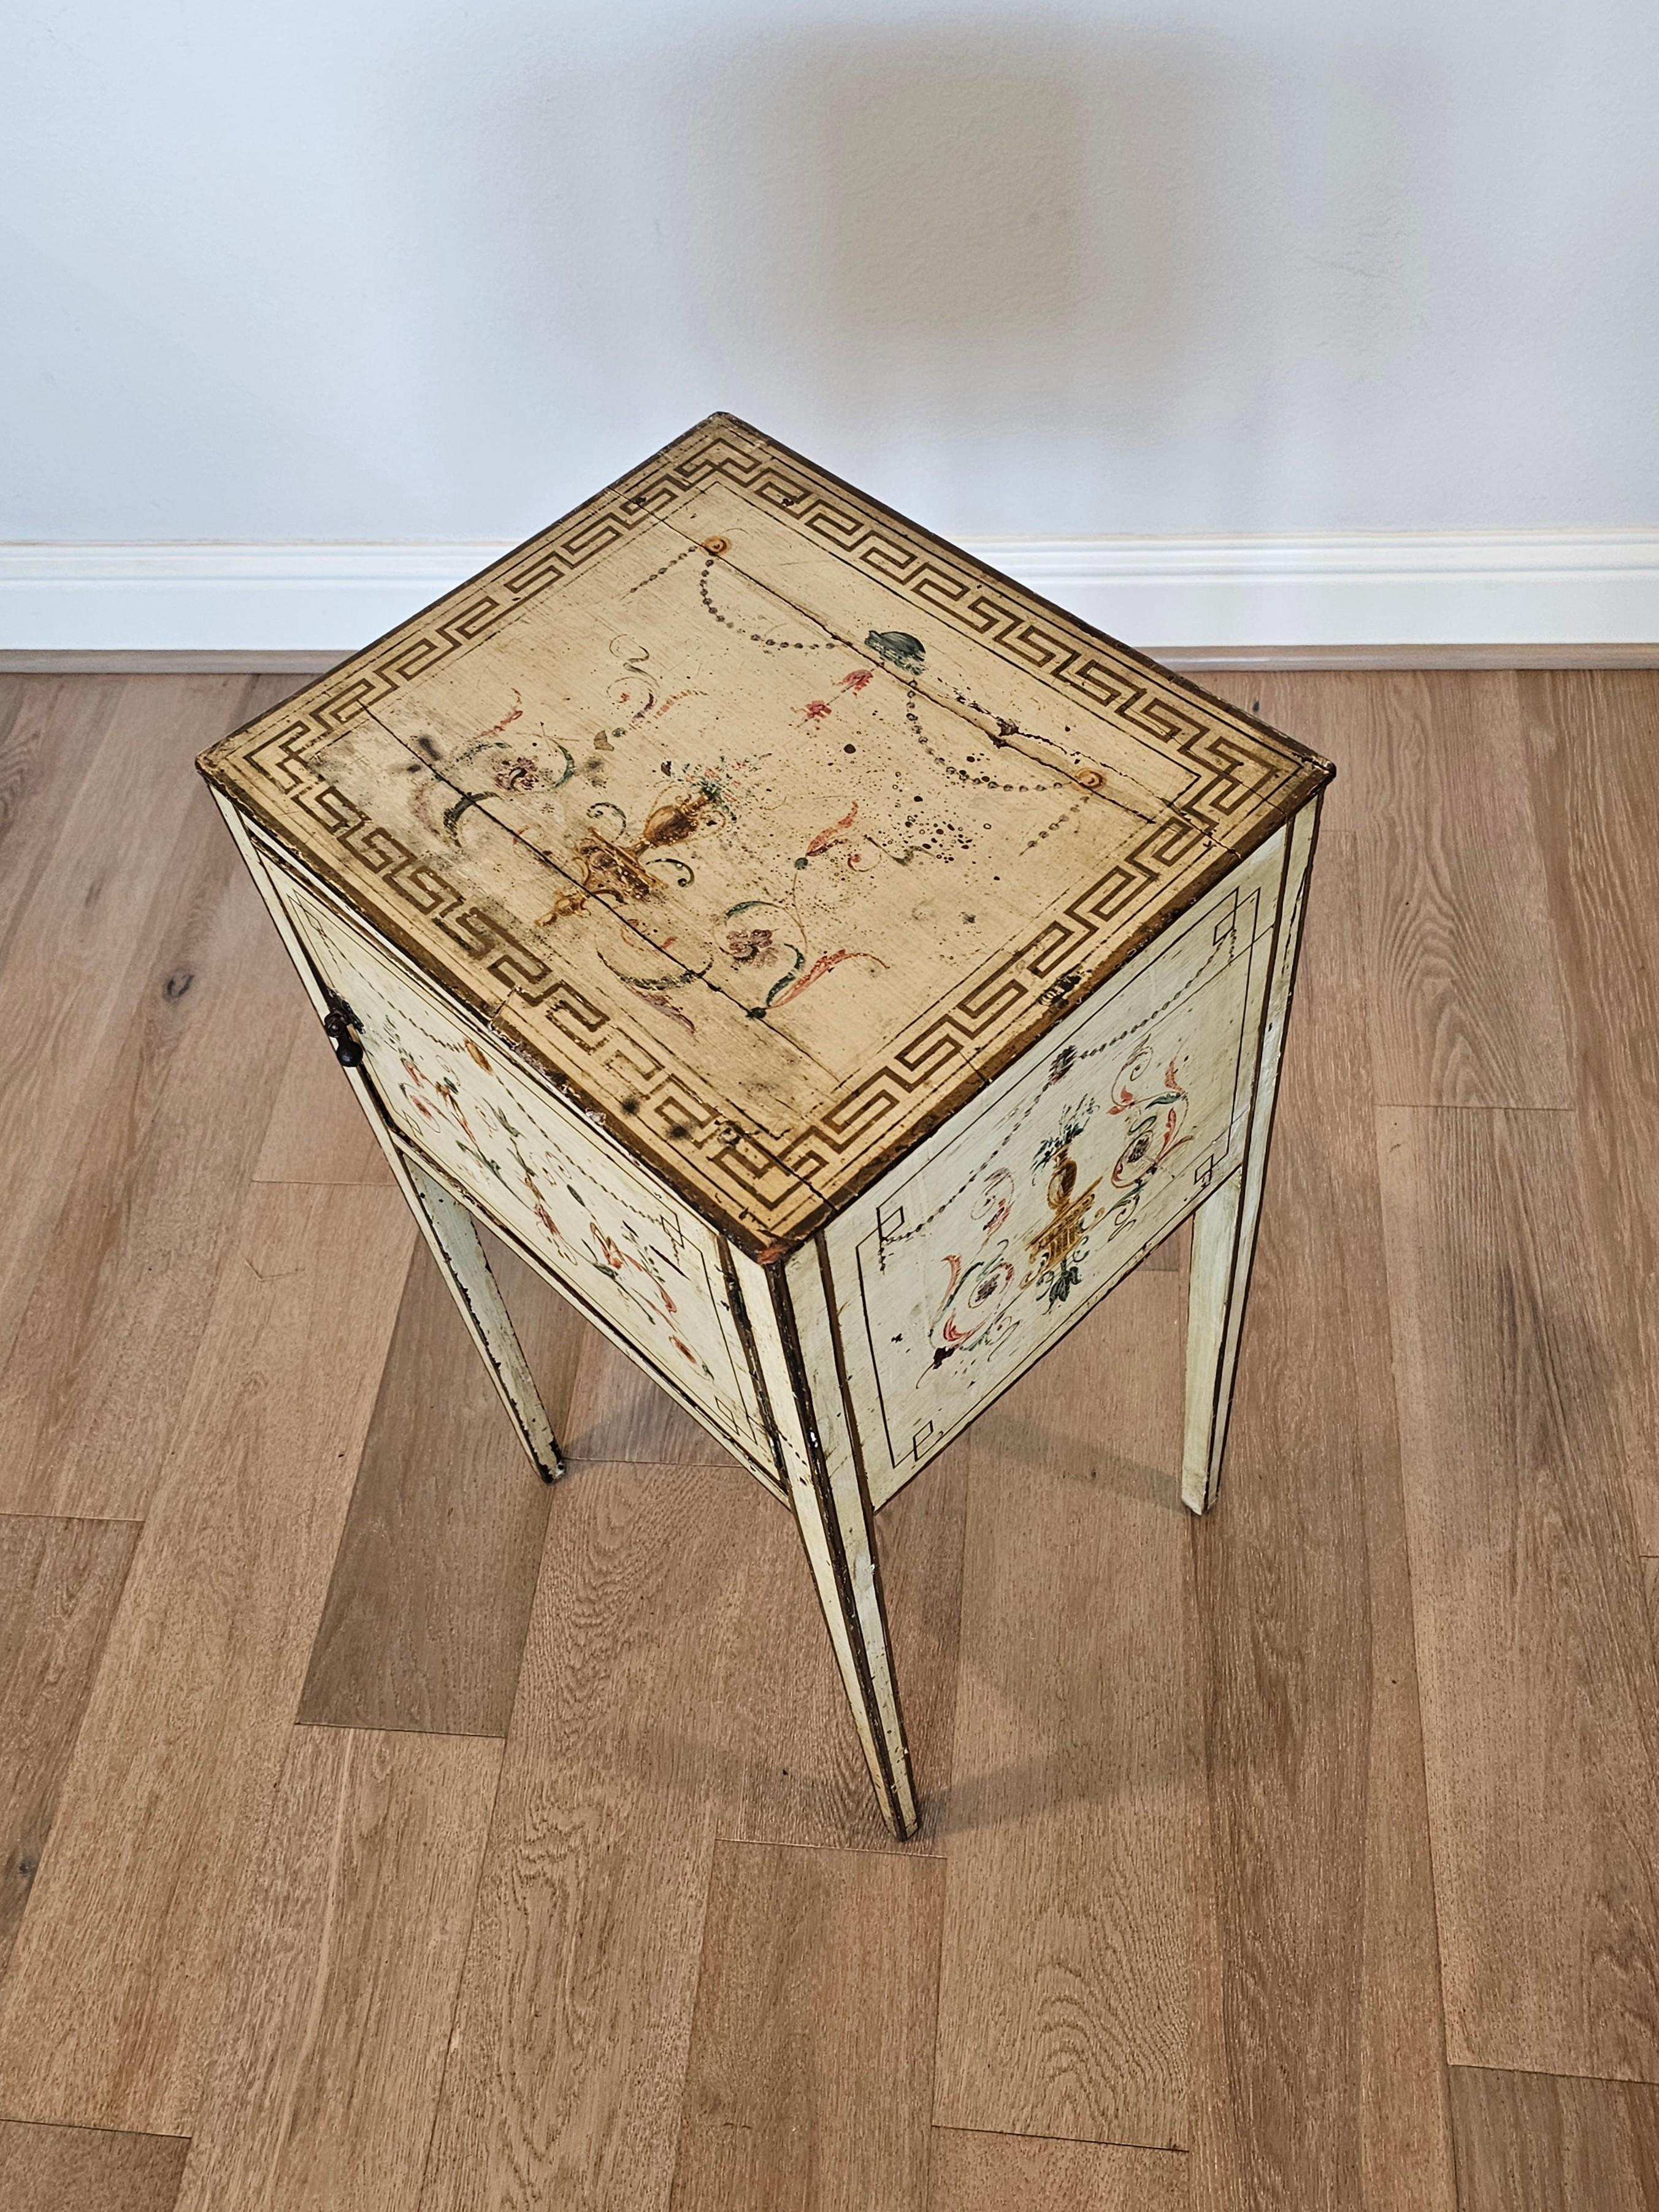 19th Century Italian Neo-classical Revival Hand-Painted Nightstand Table For Sale 1